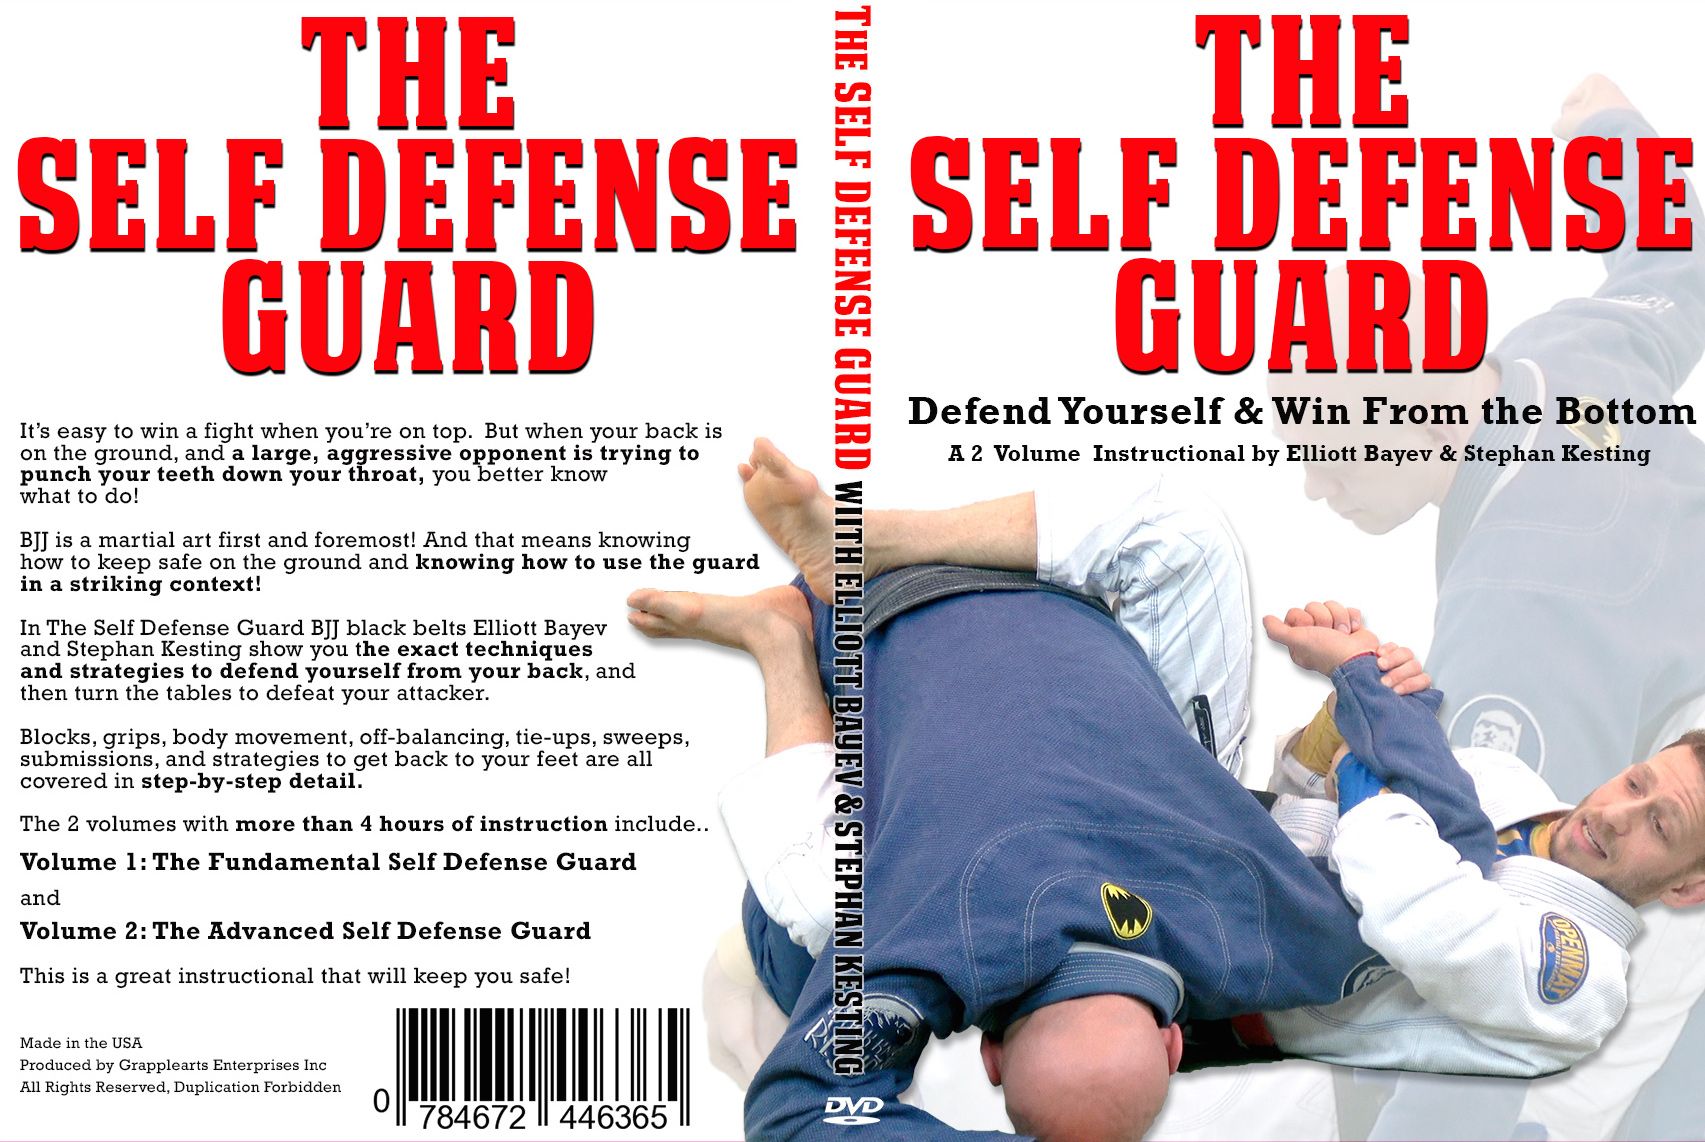 self defense moves step by step